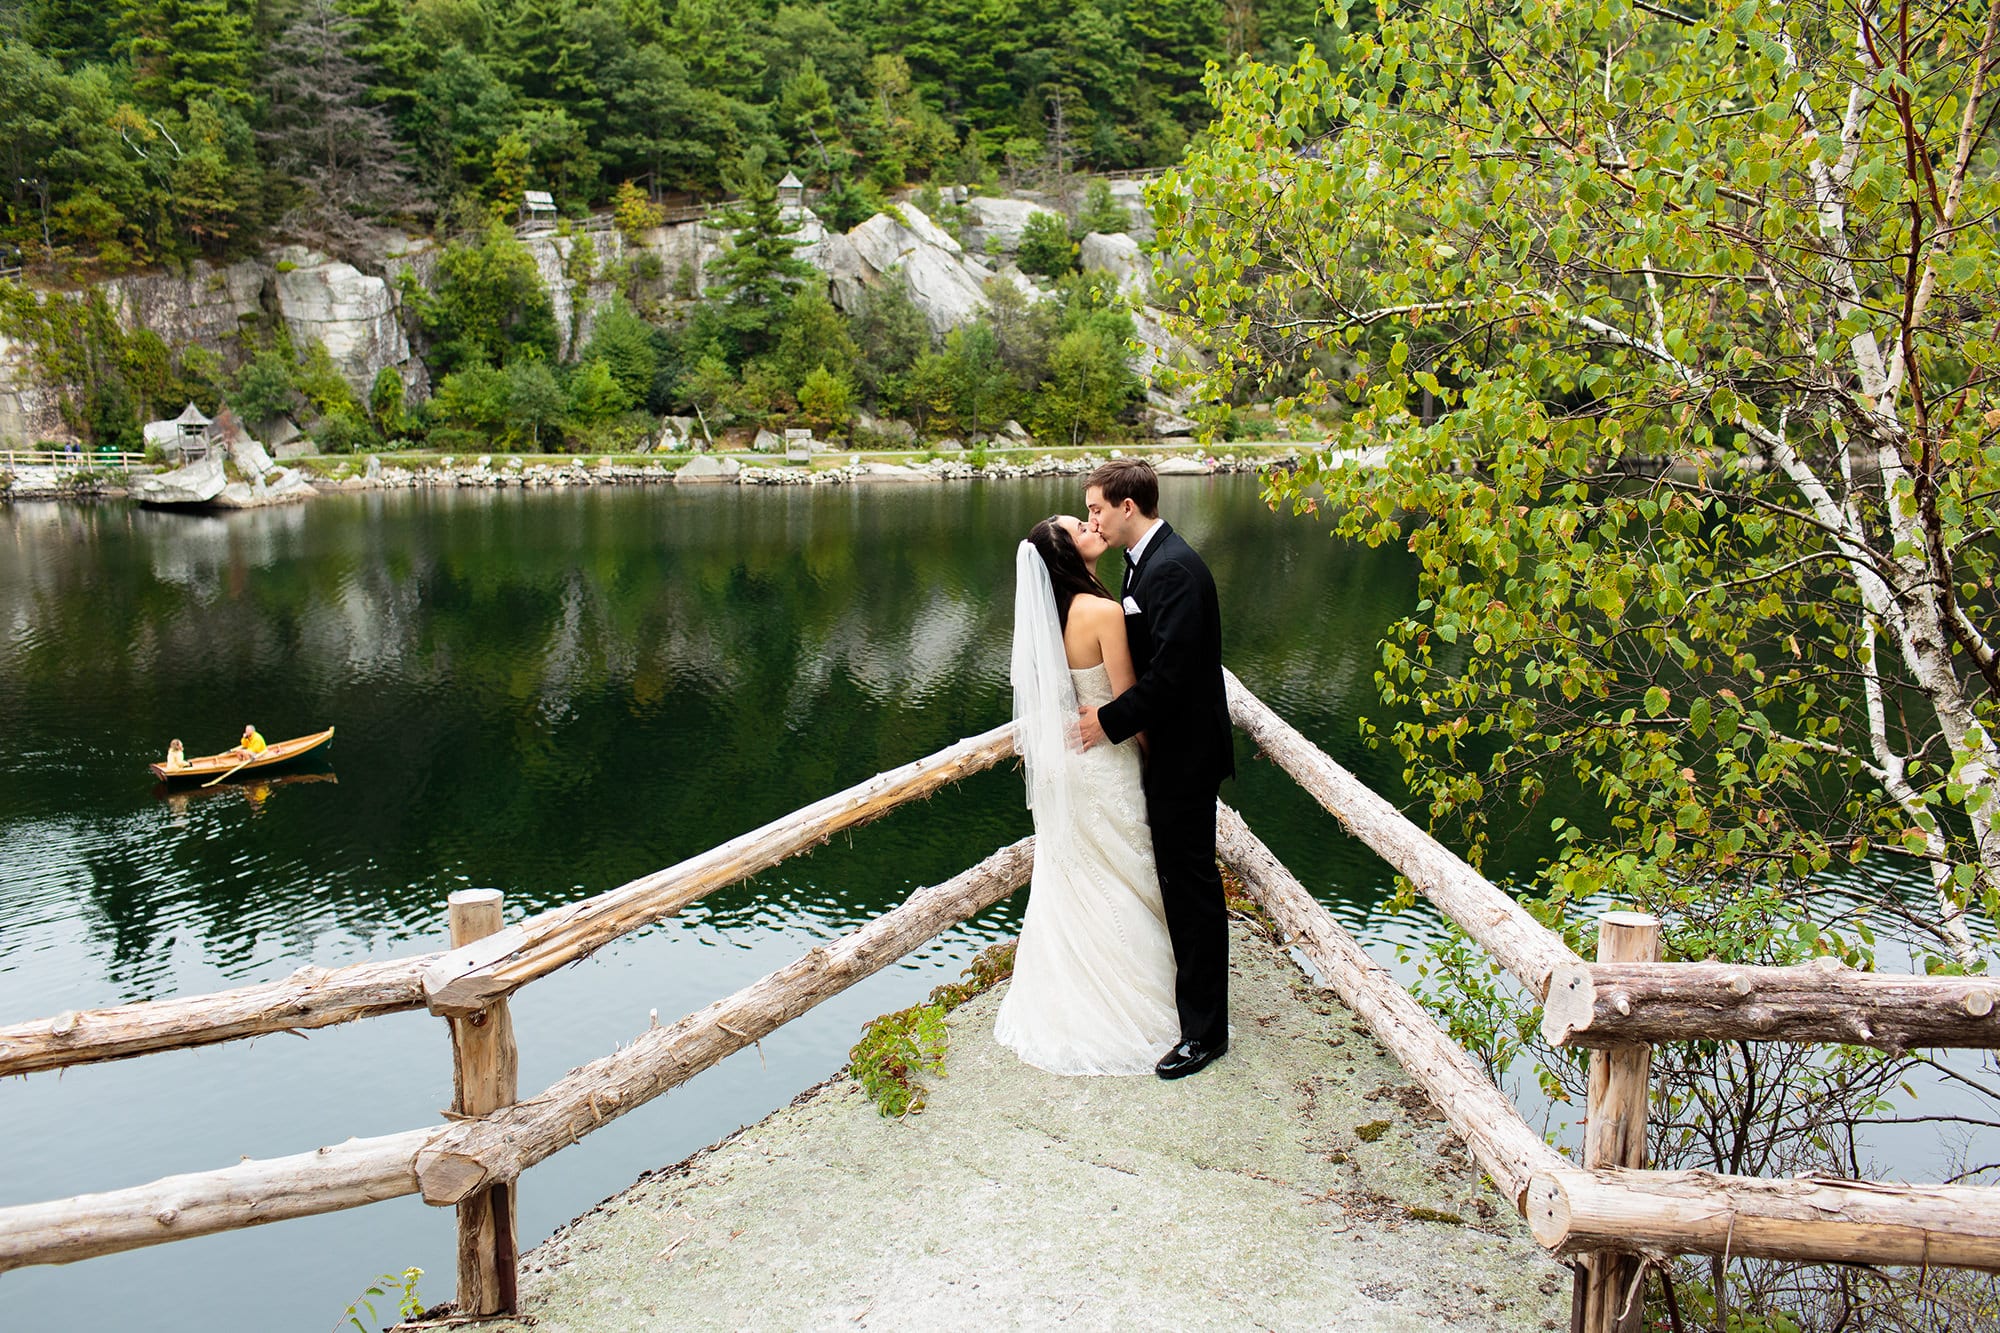 Wedding at Mohonk Mountain House in New Paltz, NY